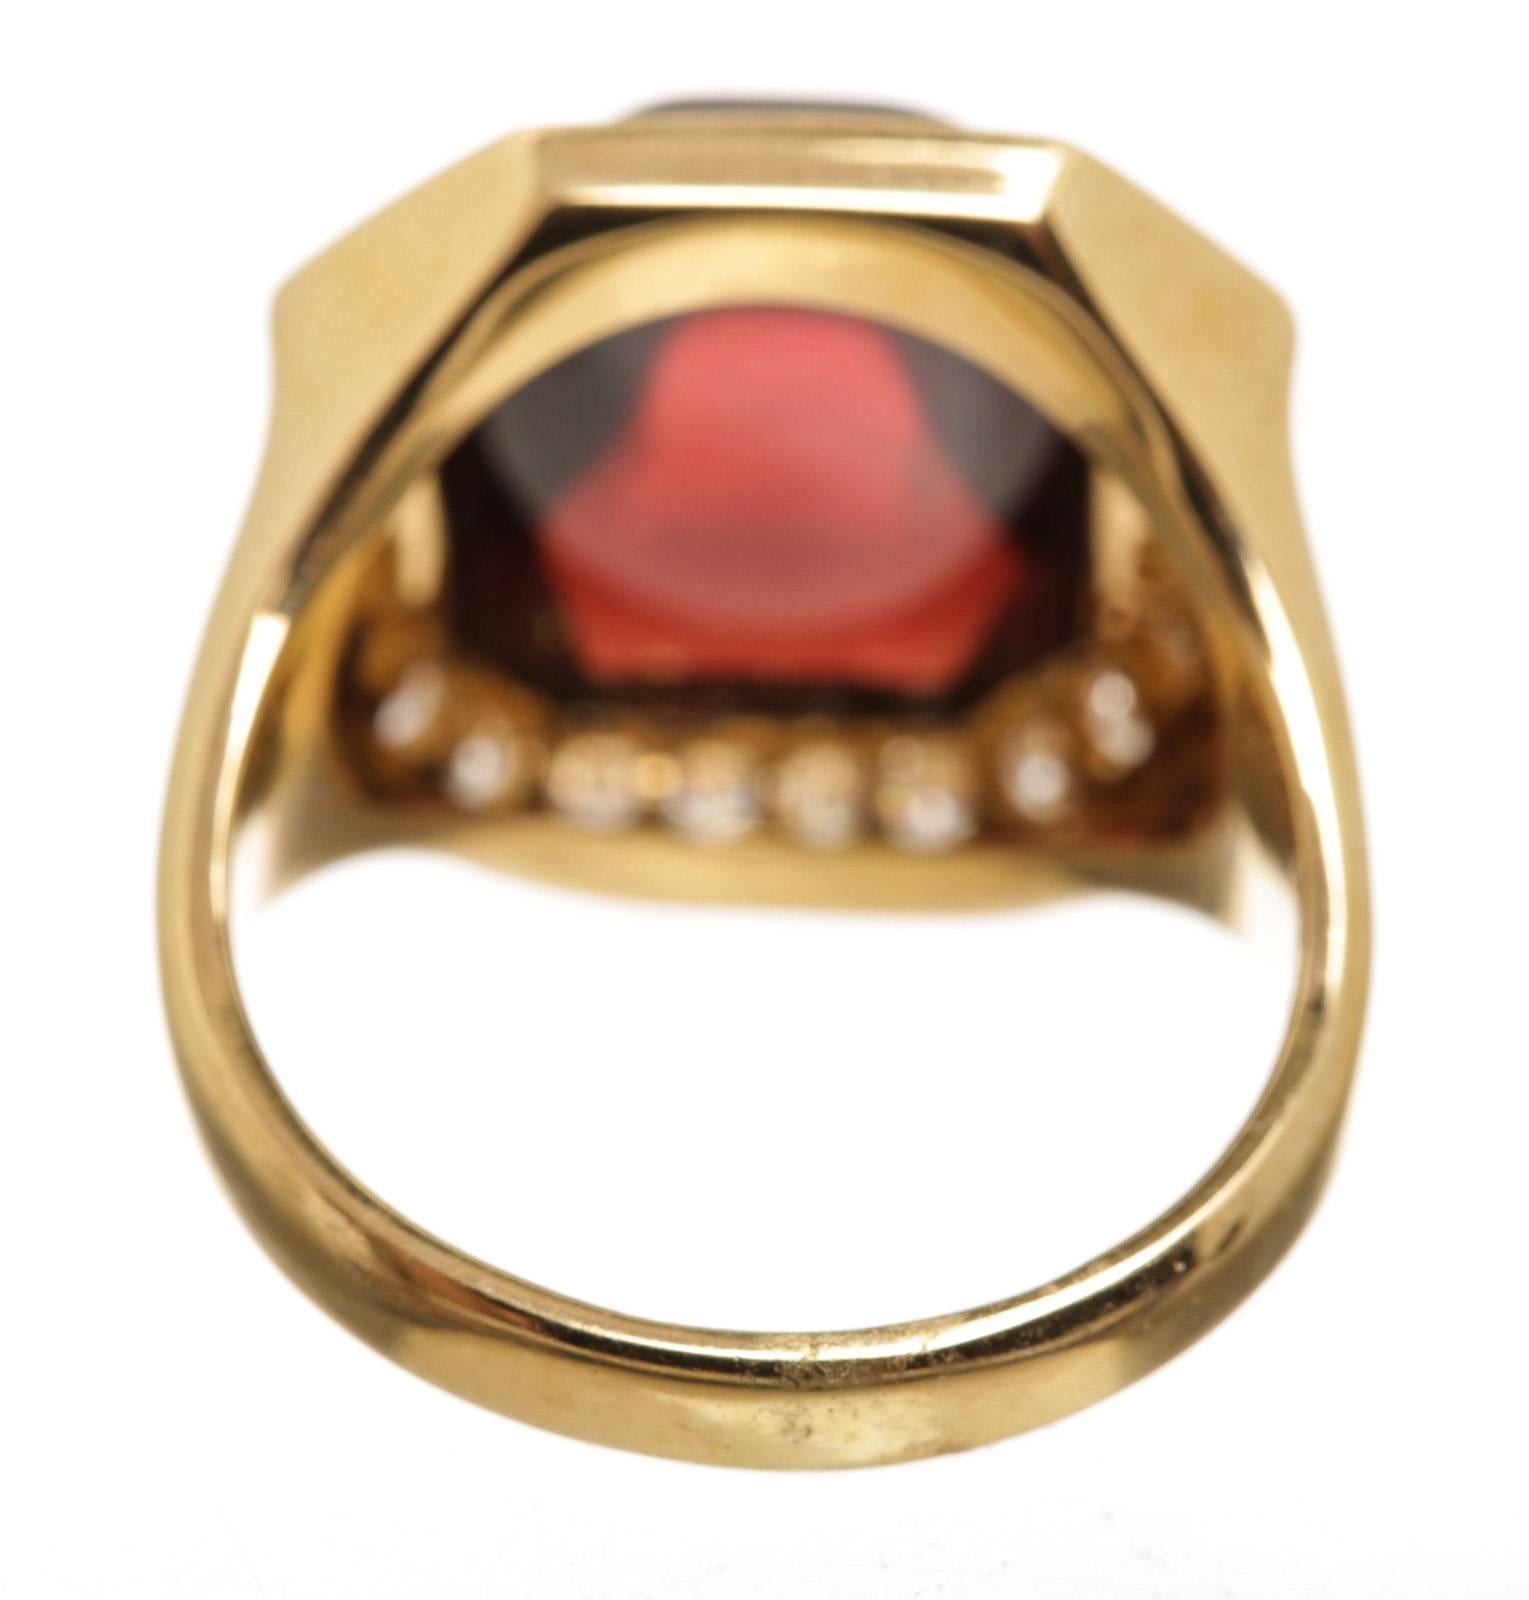 cabochon garnet Pave Diamond gold Cocktail ring In Excellent Condition For Sale In Corona Del Mar, CA